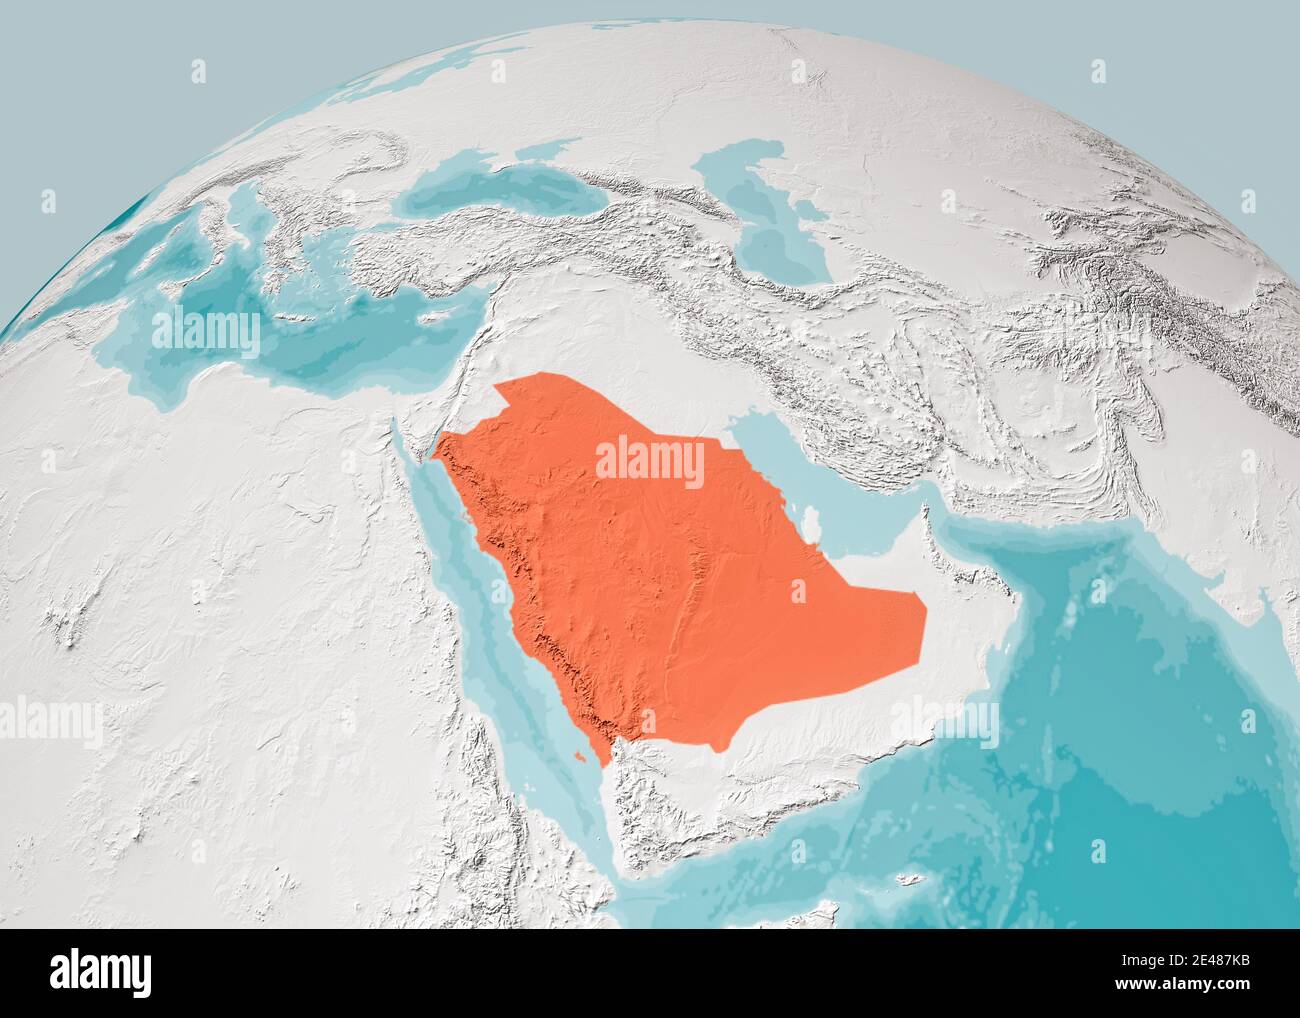 Globe map of the Arabian Peninsula, Middle East physical map, 3d render, map with relief and mountains. Arabian Sea, Persian Gulf. Saudi Arabia Stock Photo